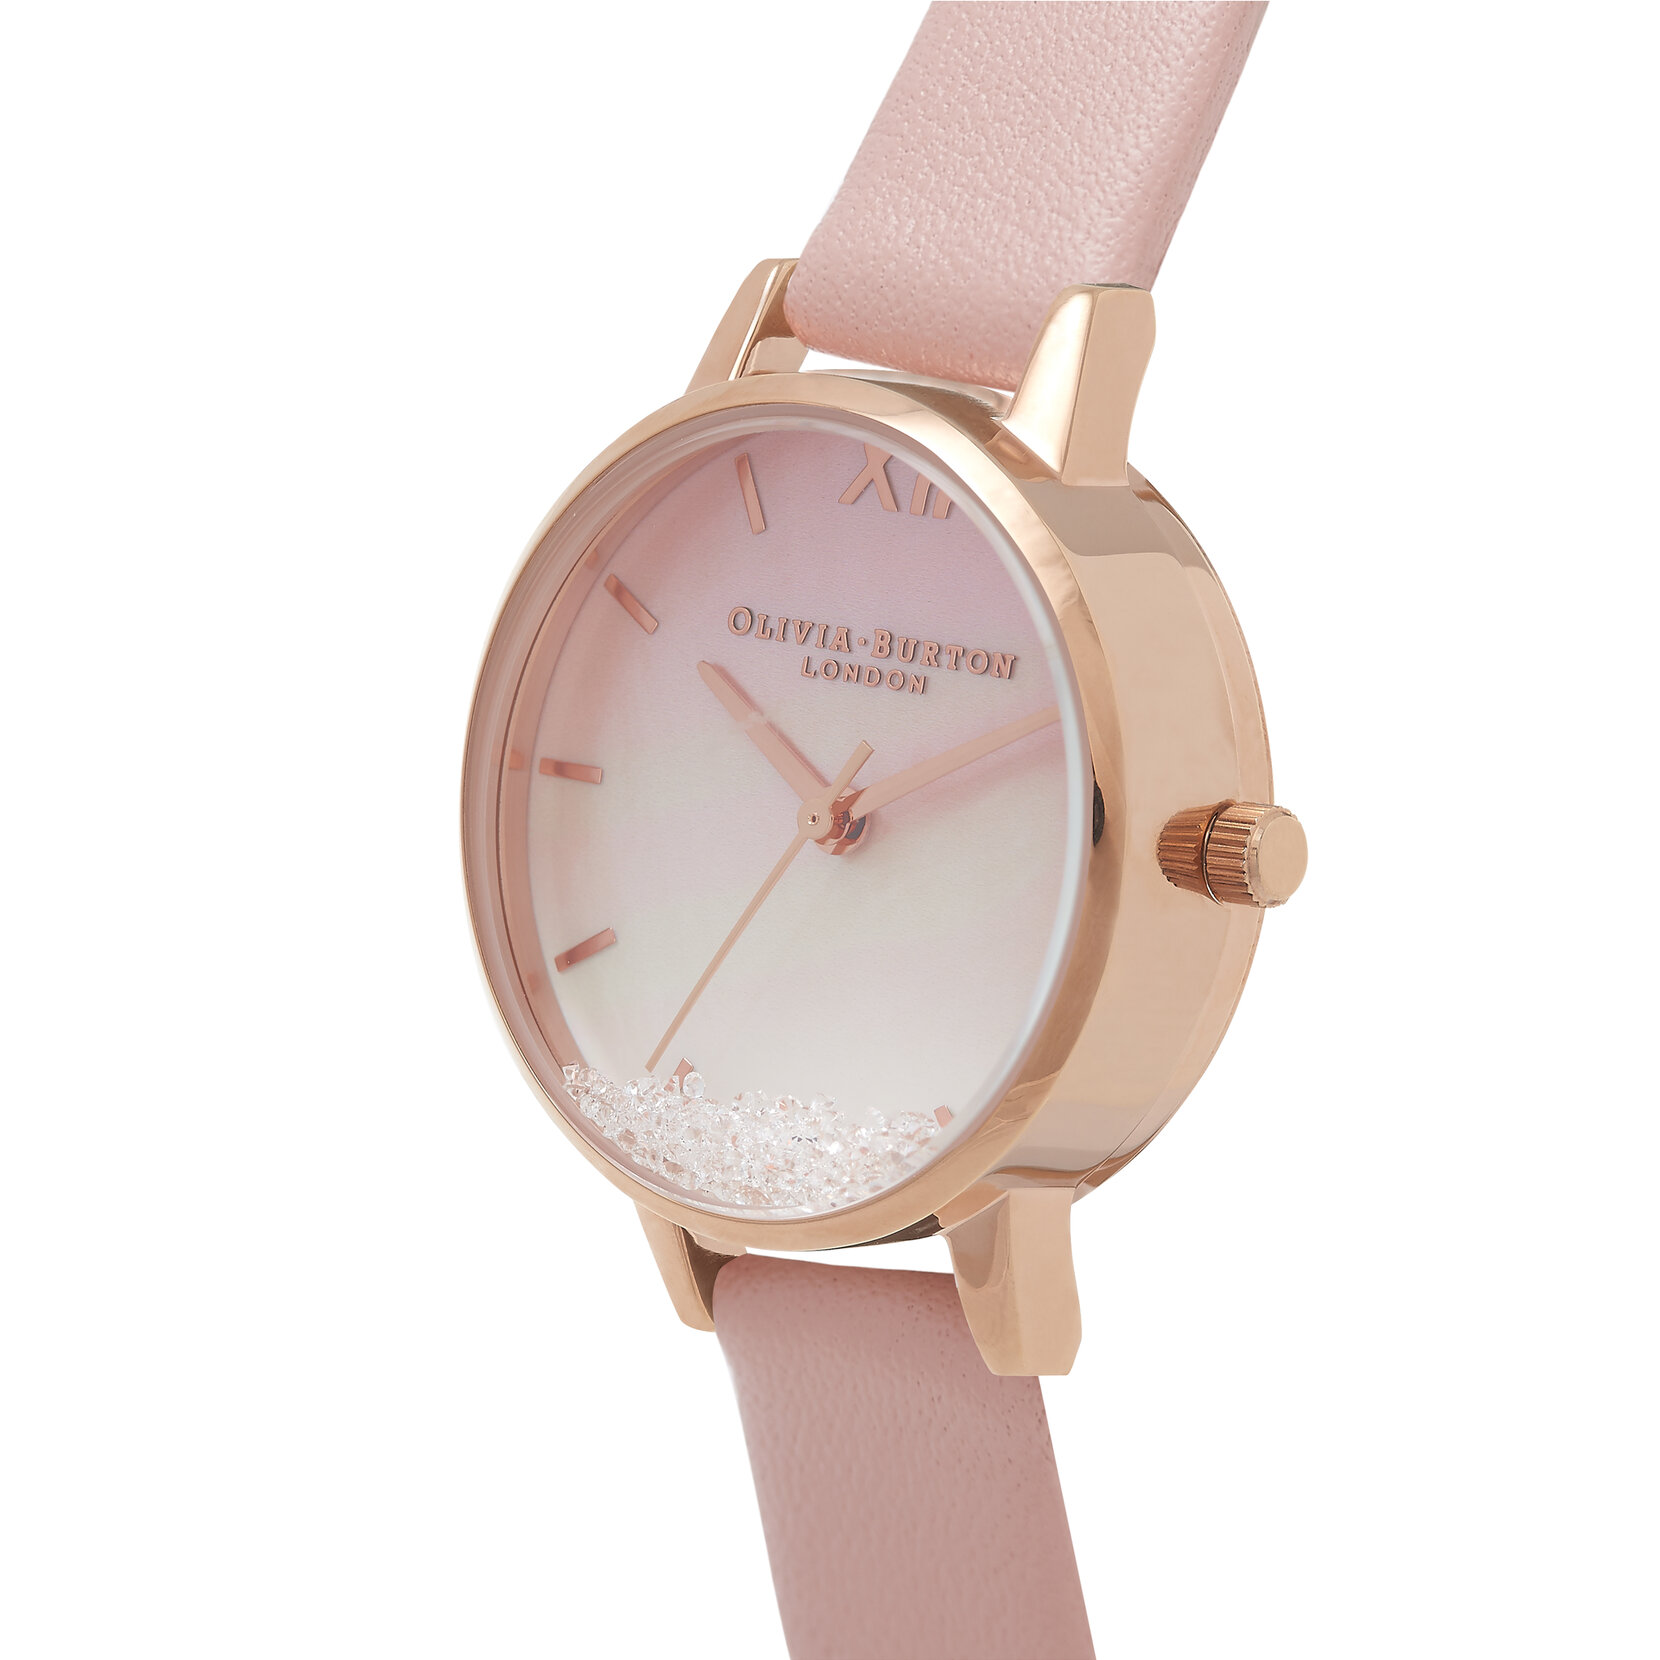 30mm Rose Gold & Pink Leather Strap Watch